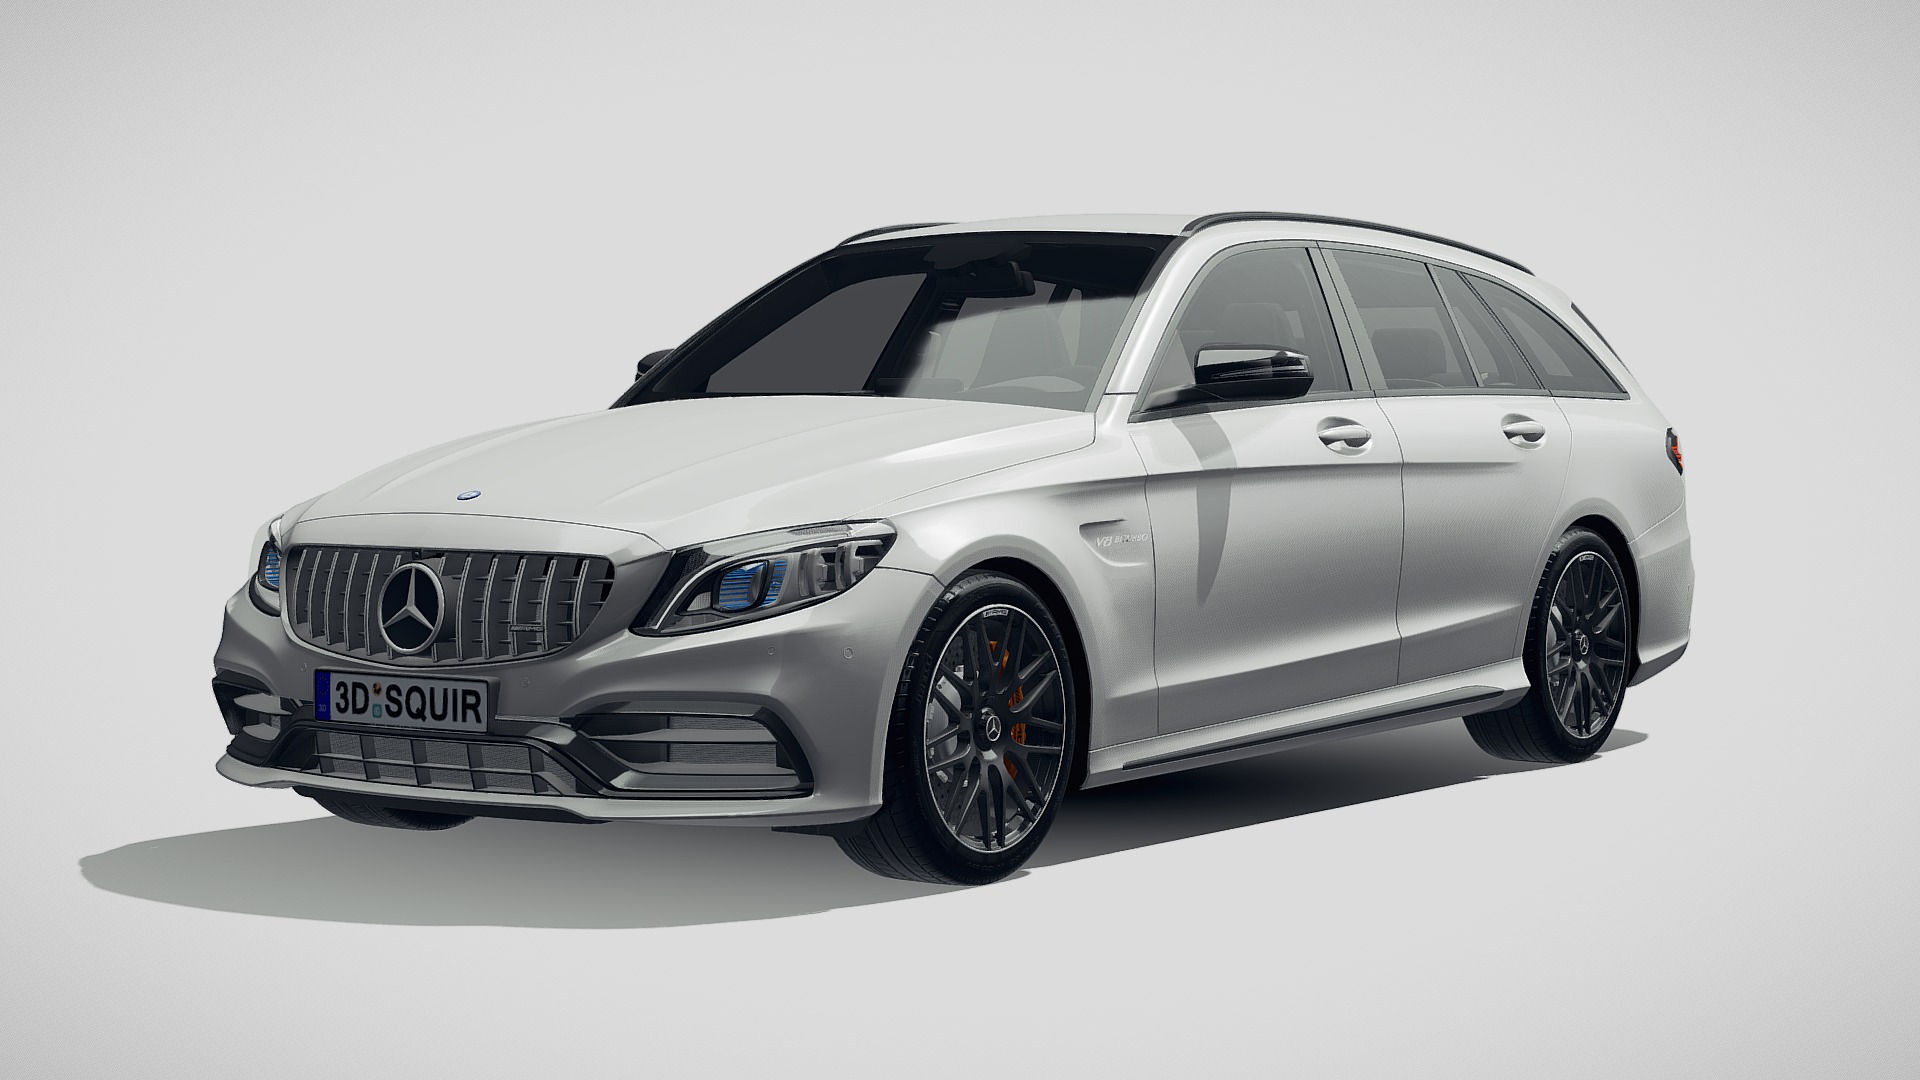 3D model Mercedes AMG C63 estate 2019 - This is a 3D model of the Mercedes AMG C63 estate 2019. The 3D model is about a white car with a black background with Holden Arboretum in the background.